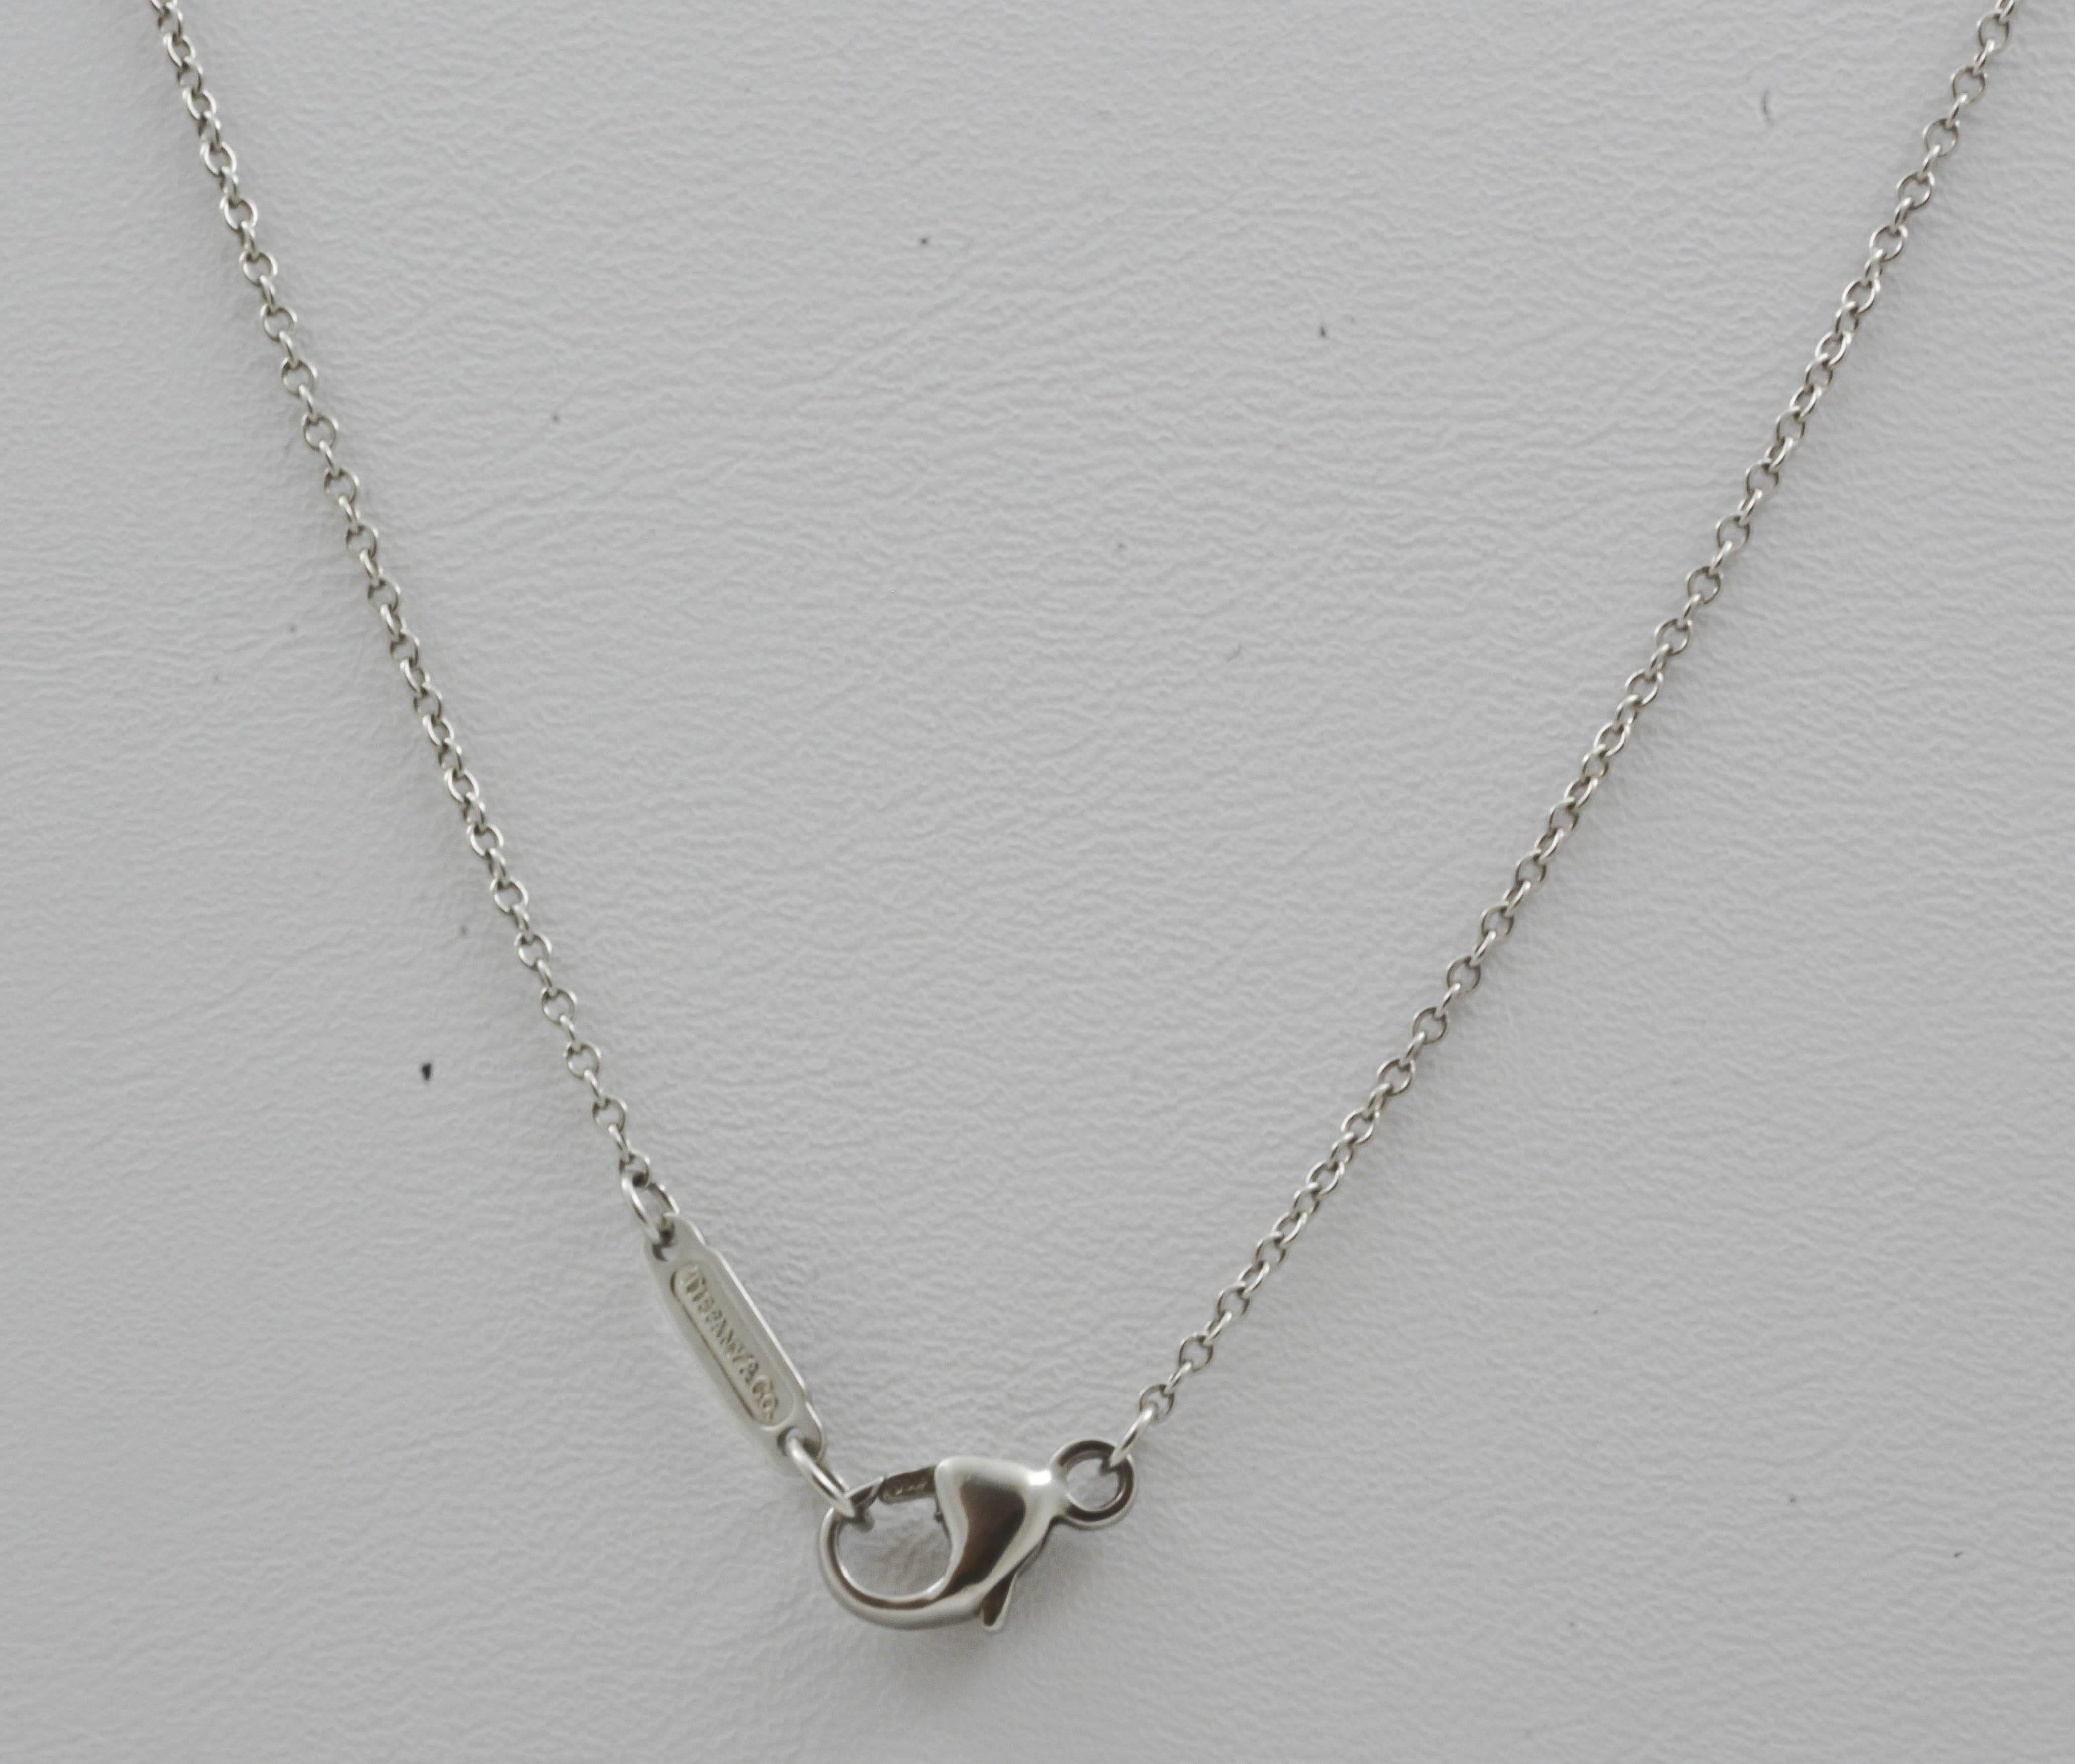 Displayed on a lovely, 16in platinum cable chain, this classic Tiffany & Co. tapered diamond Jazz pendant set is sure to add sparkle to your life. Six round, brilliant cut diamonds with an approximate total weight of 0.50 carats (clarity VS,